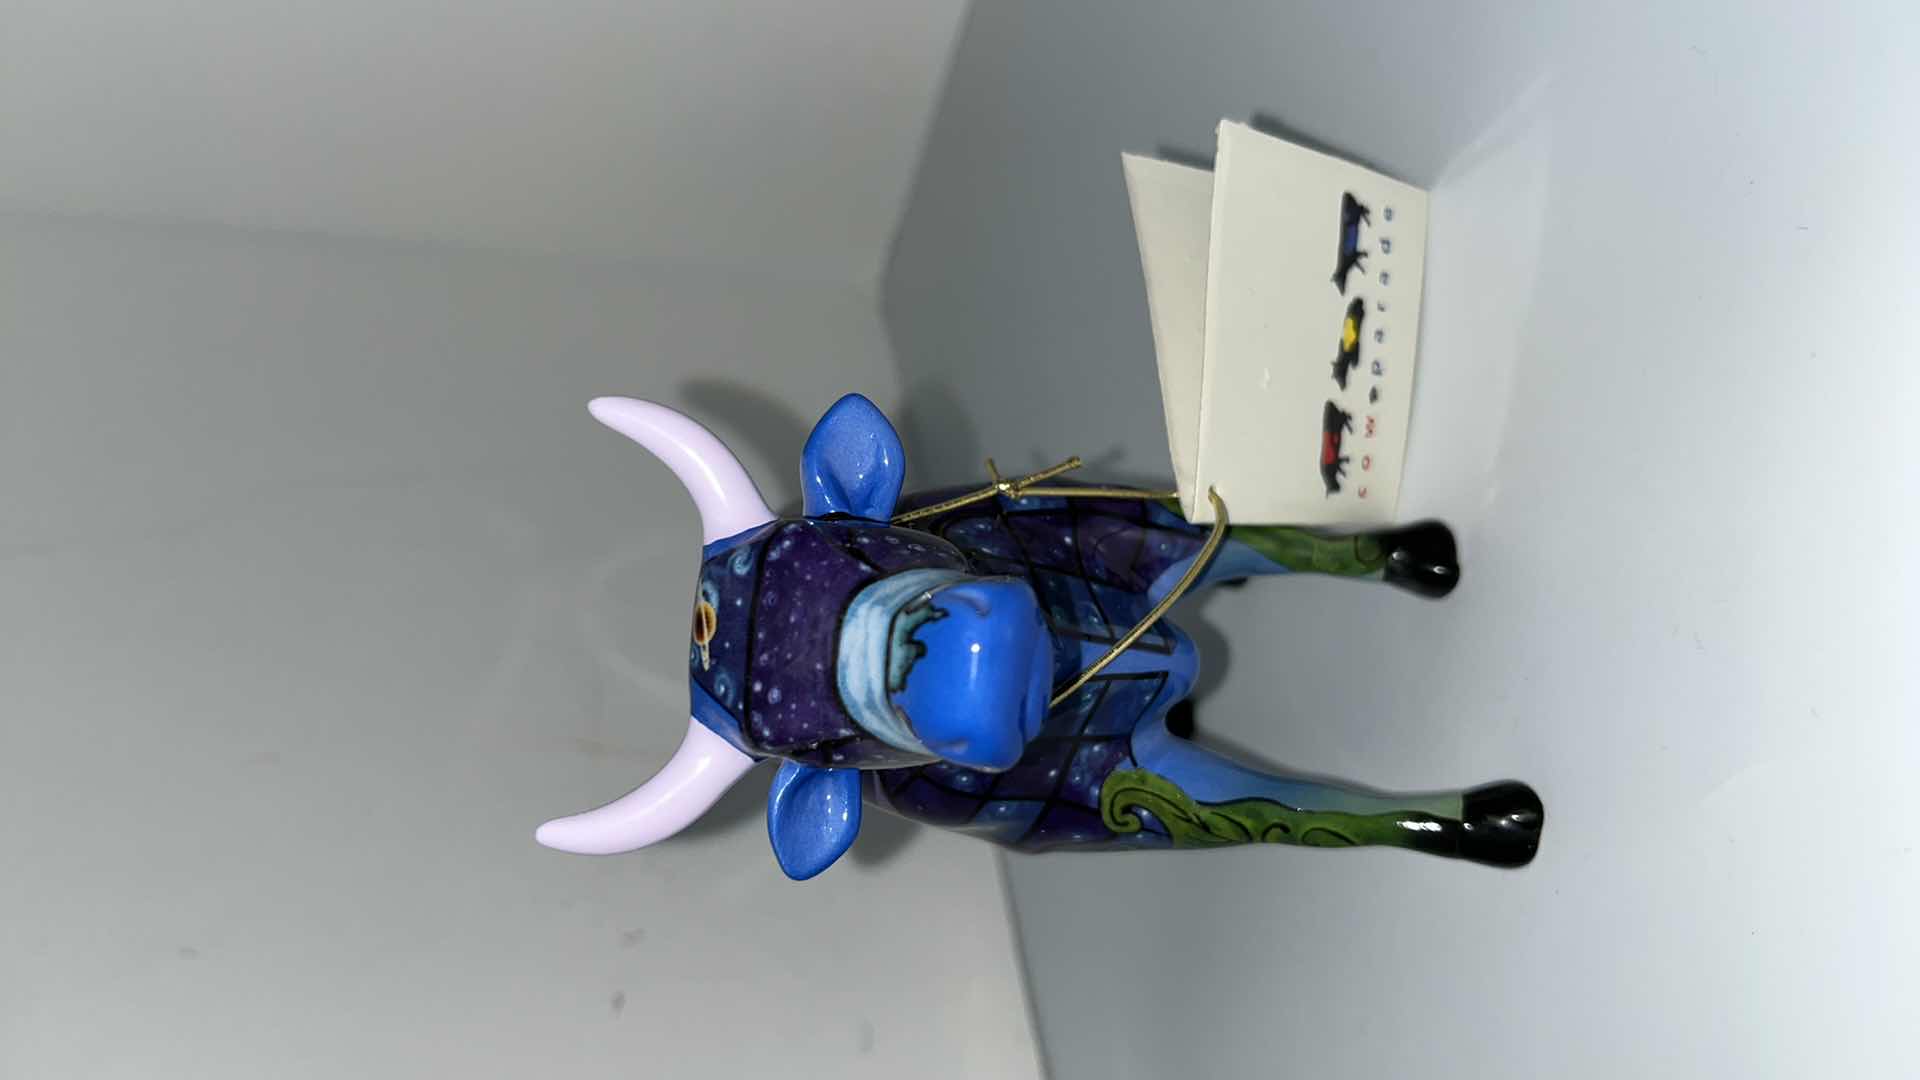 Photo 3 of WESTLAND GIFTWARE COW PARADE INFINITY COW FIGURINE 2001 (9191)